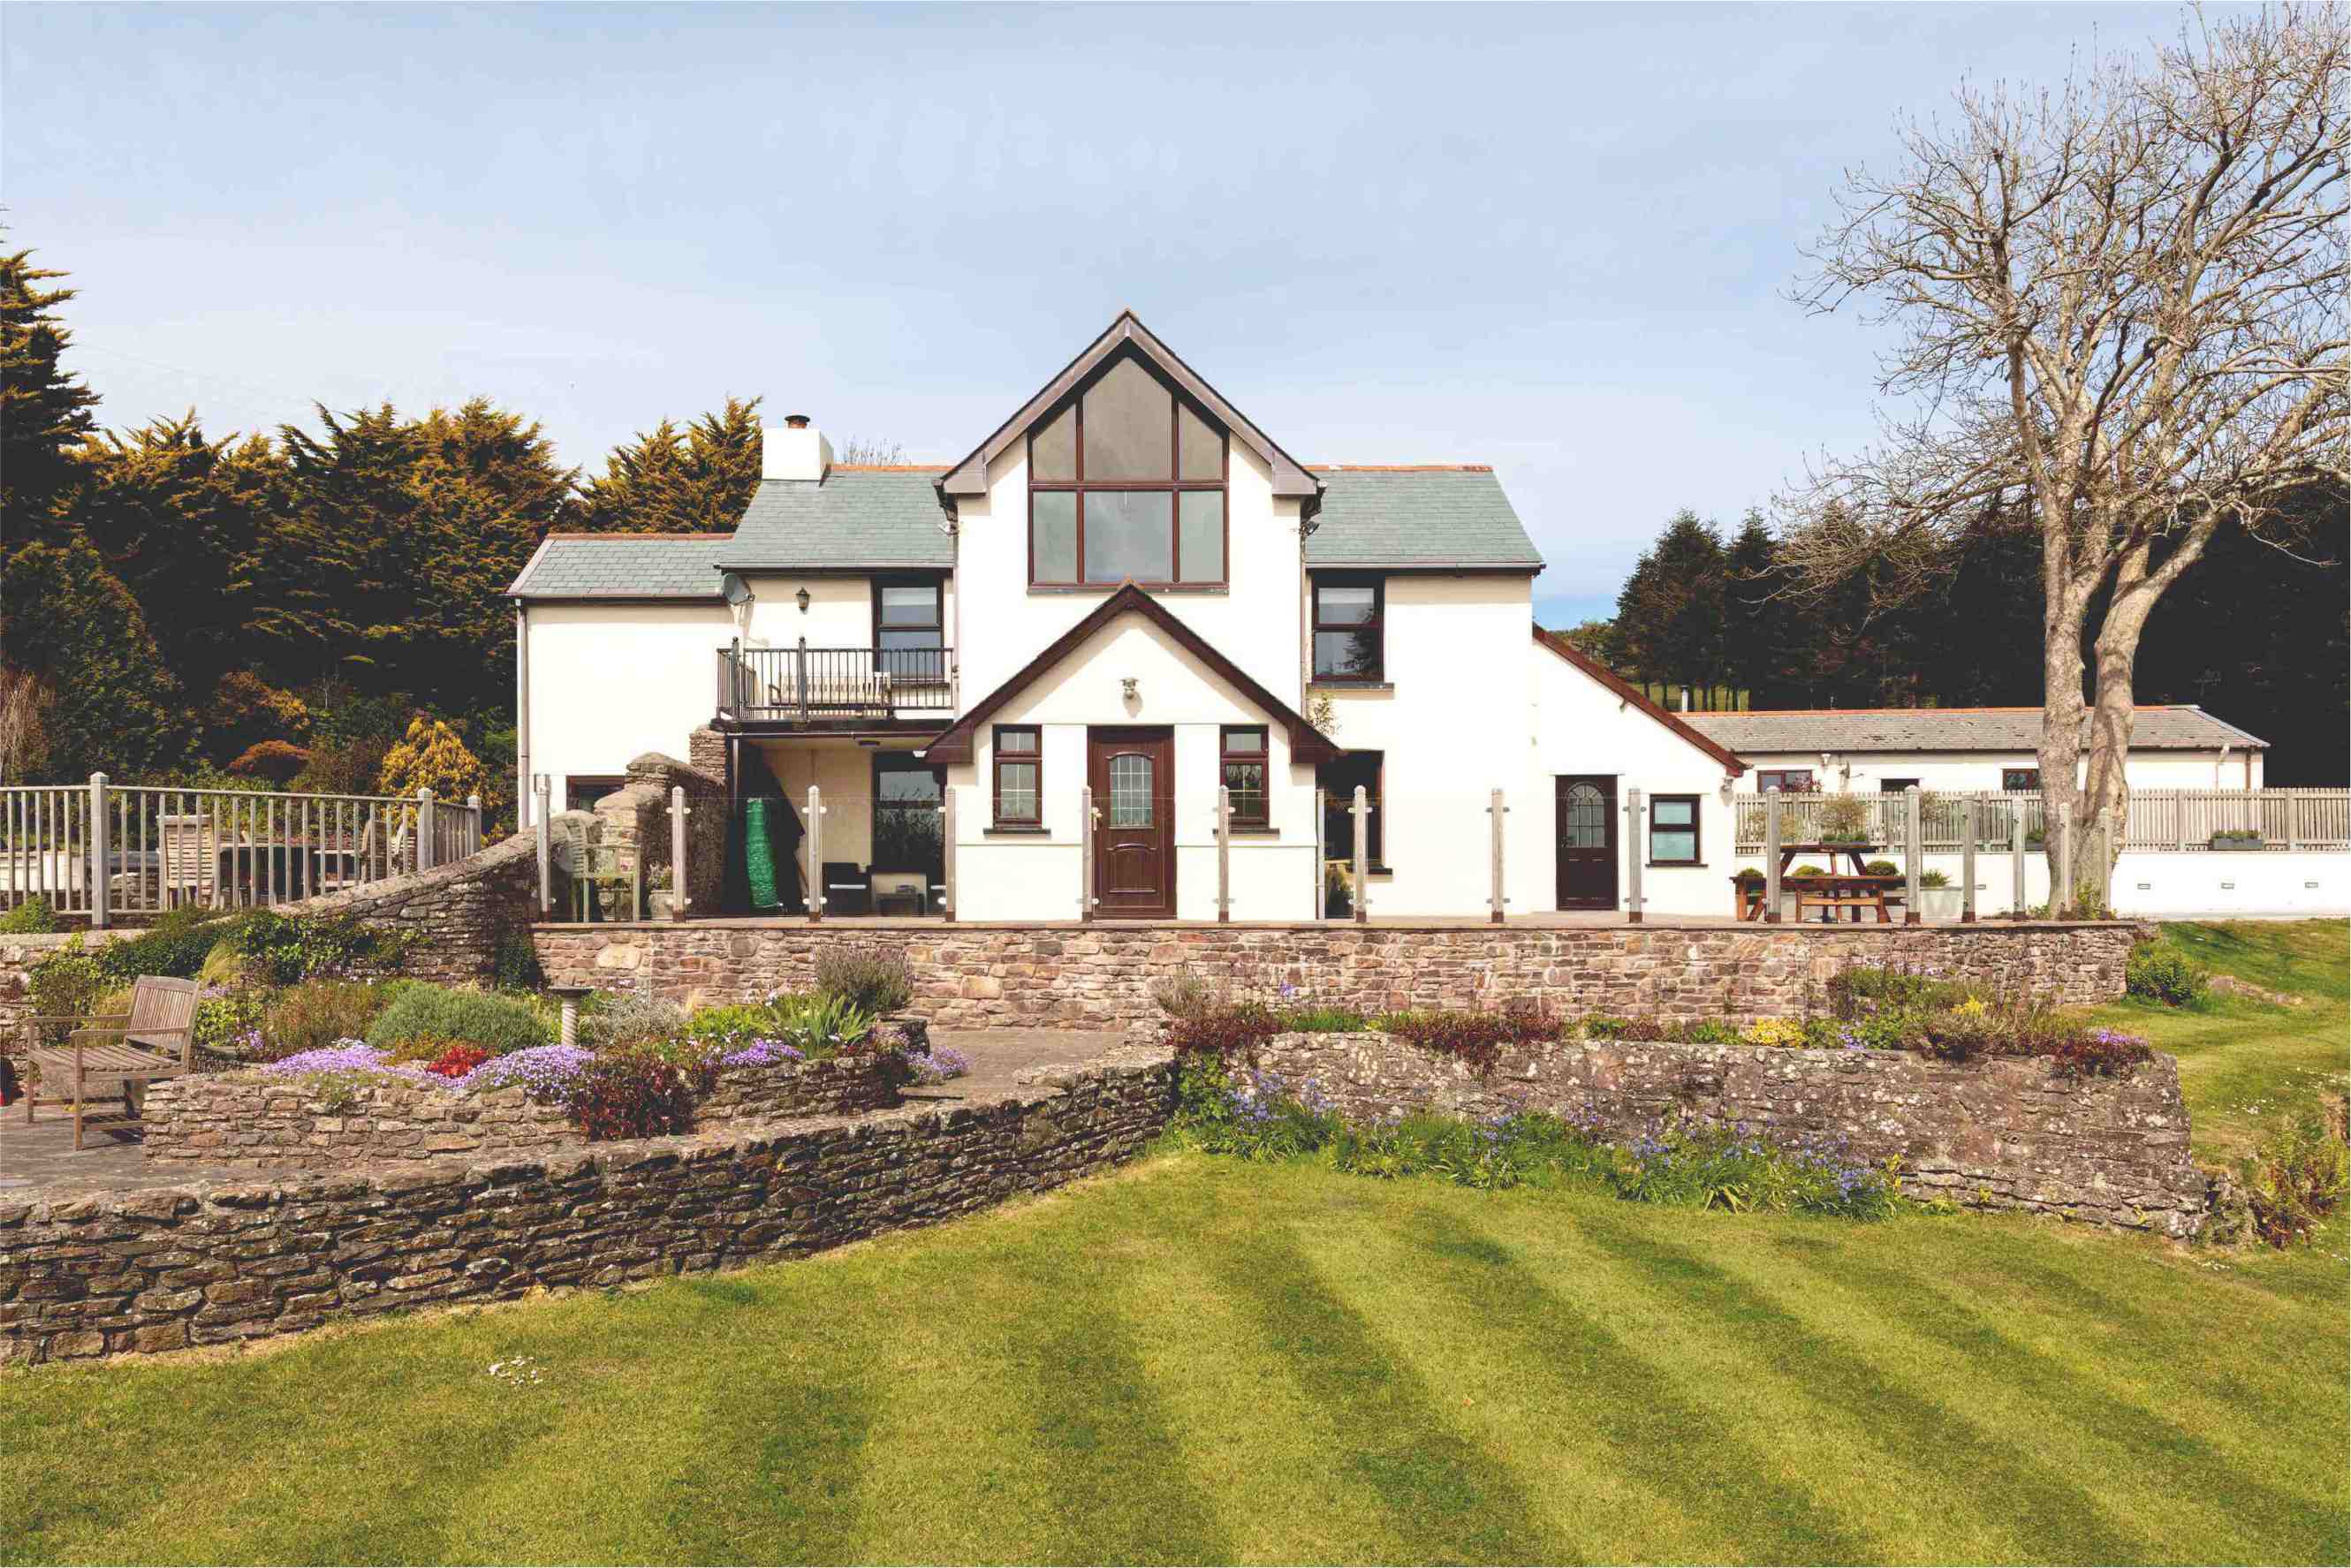 Large Accessible Home on the Coast of Combe Martin, United Kingdom